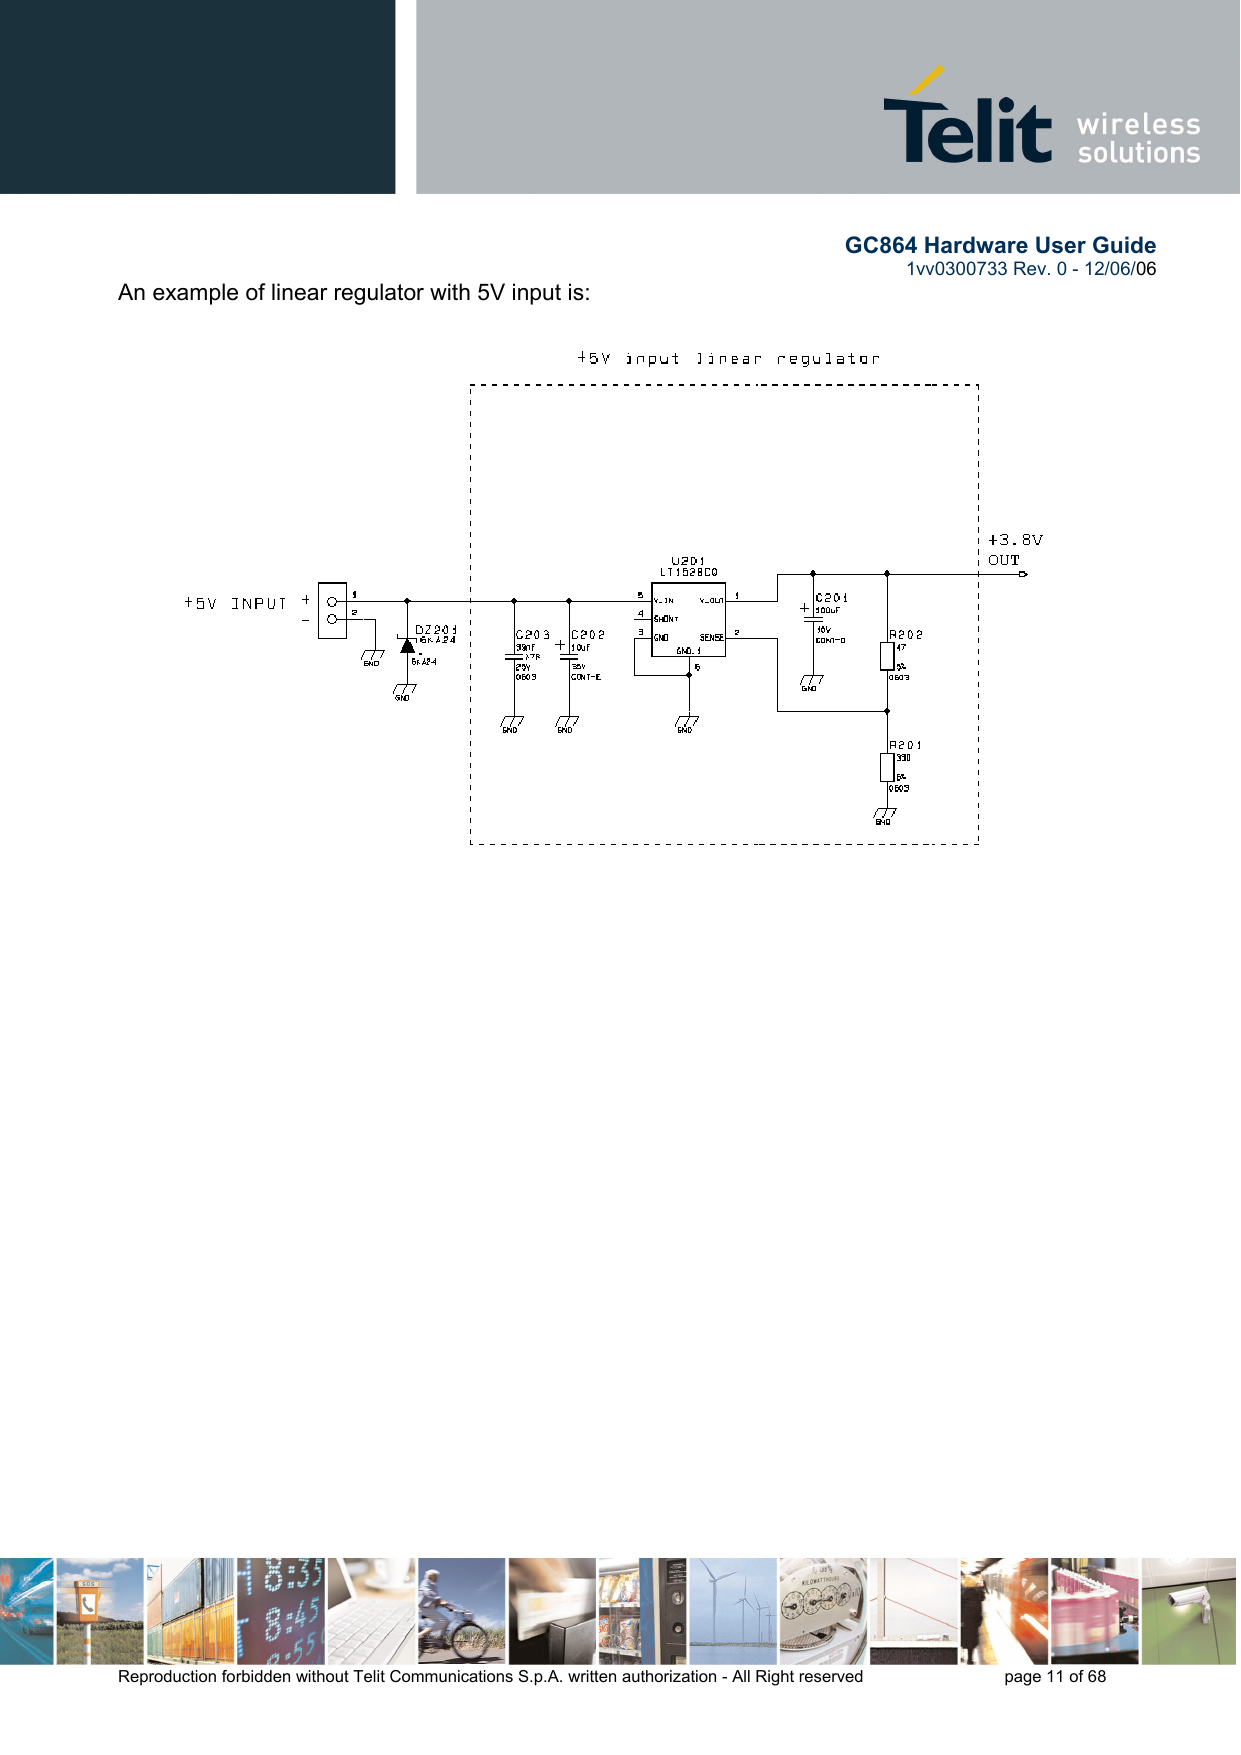        GC864 Hardware User Guide  1vv0300733 Rev. 0 - 12/06/06  Reproduction forbidden without Telit Communications S.p.A. written authorization - All Right reserved    page 11 of 68  An example of linear regulator with 5V input is:                         